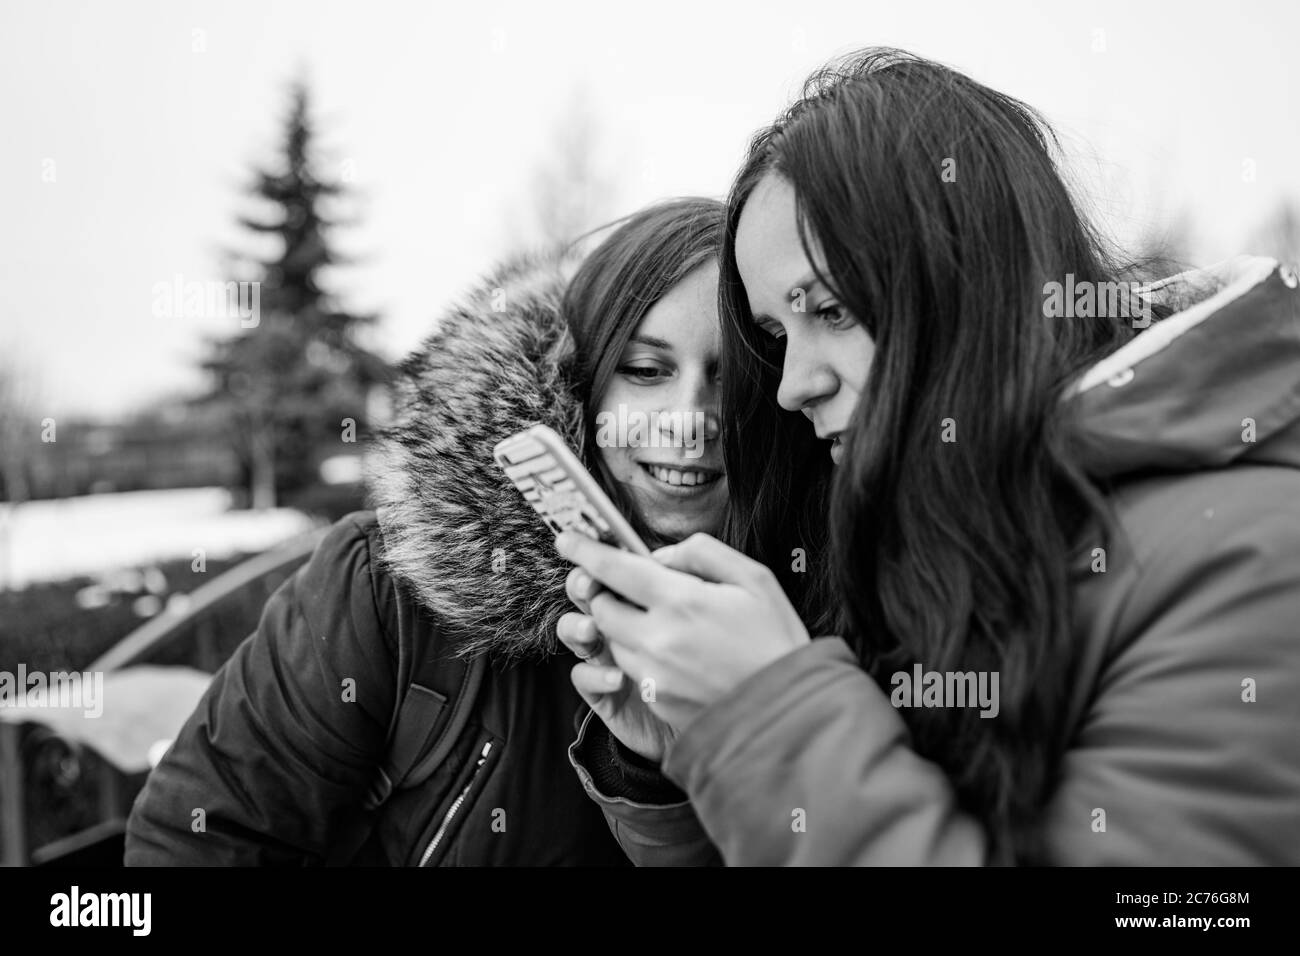 The meeting of girlfriends on street. Two women look in mobile phone, considering their photos on walk. Black and white photo. Stock Photo